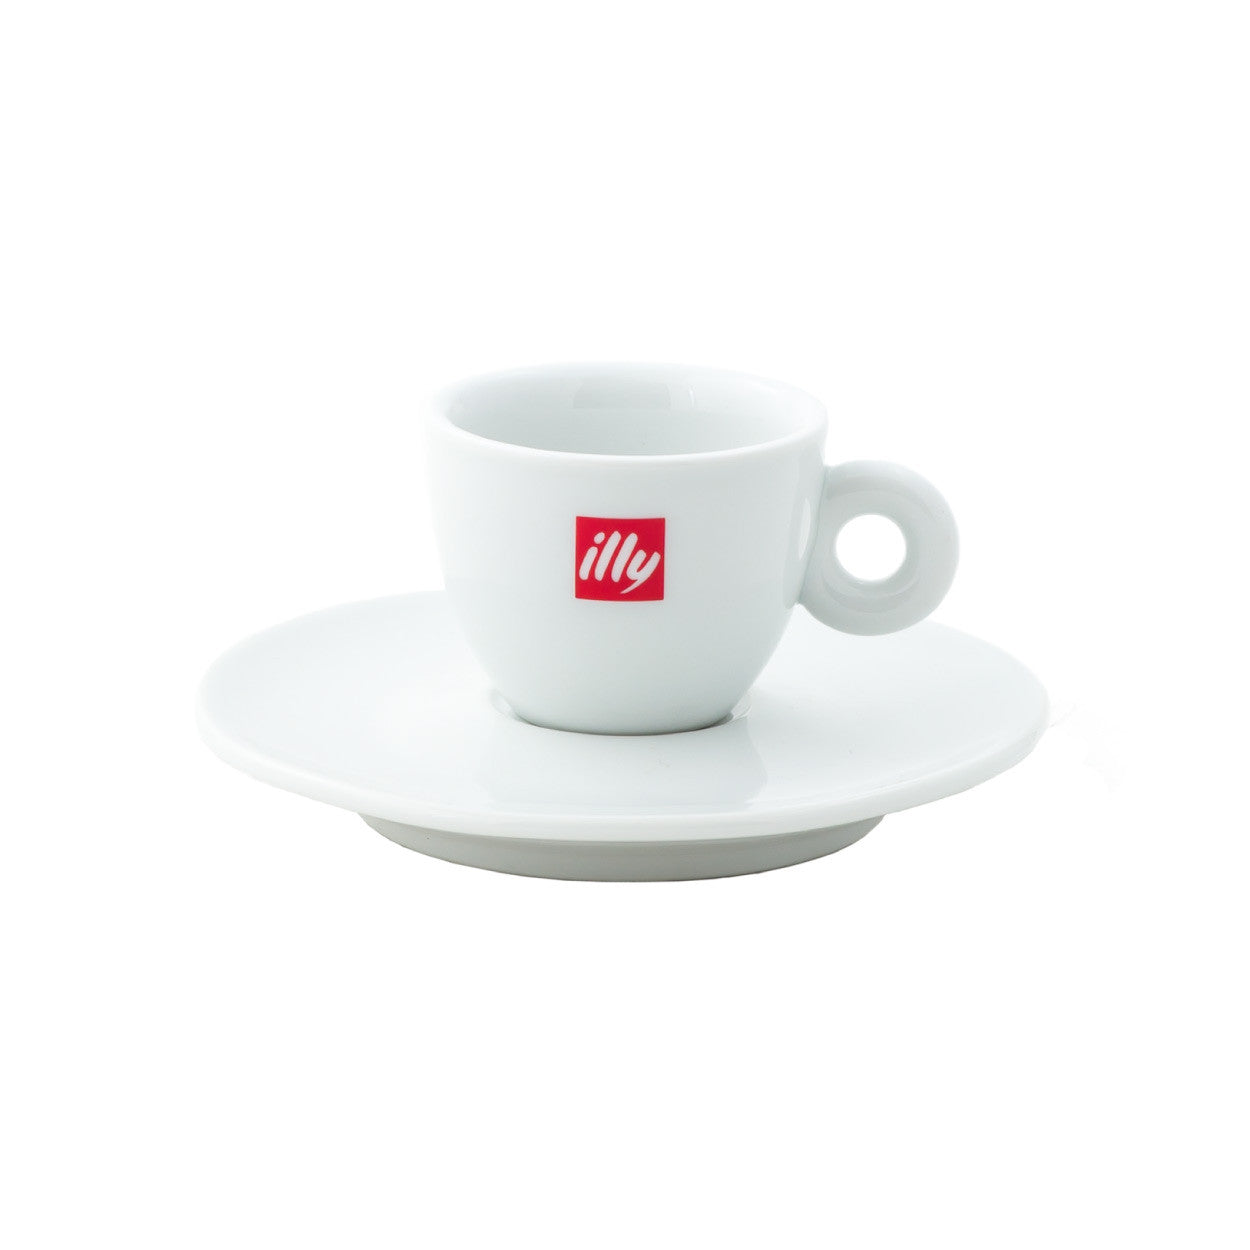 Illy Espresso Cups & Saucers Home Coffee Solutions